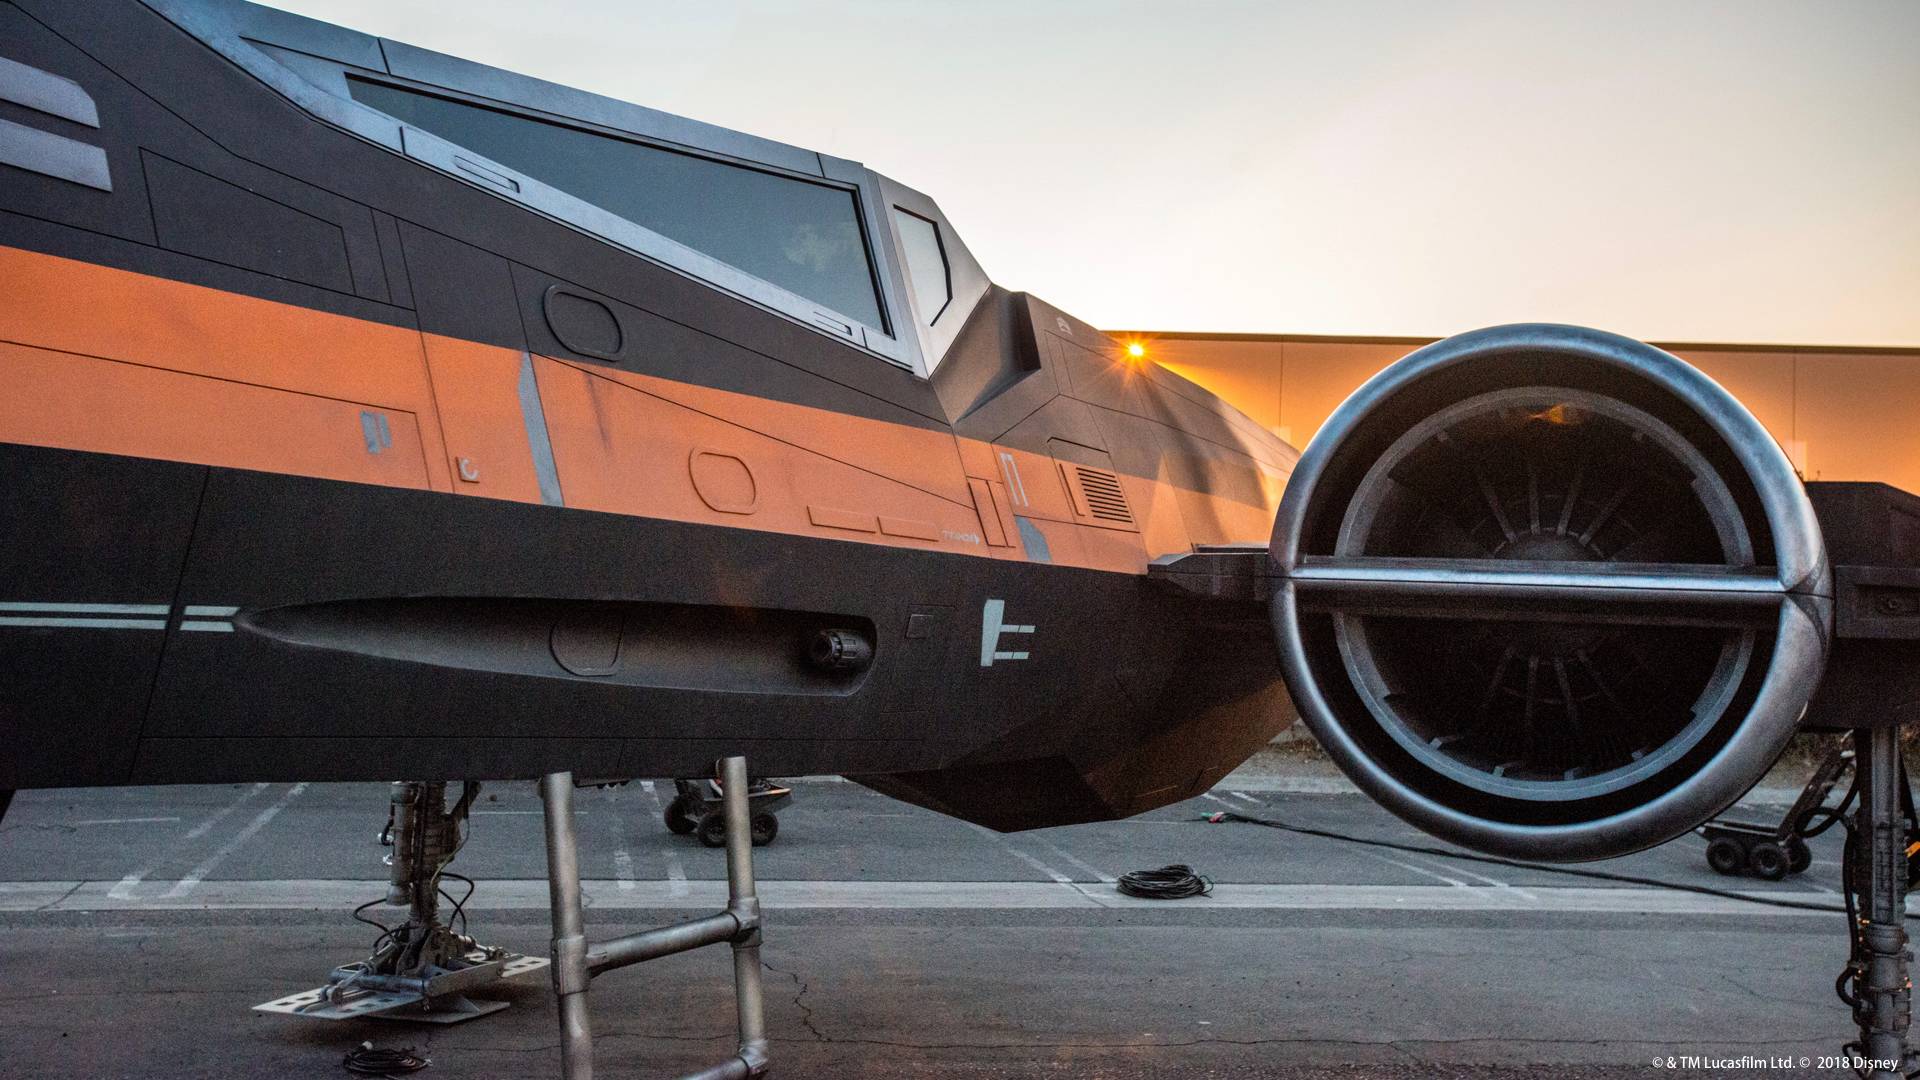 PHOTOS - X-wing Starfighter that will be seen in Star Wars Galaxy's Edge